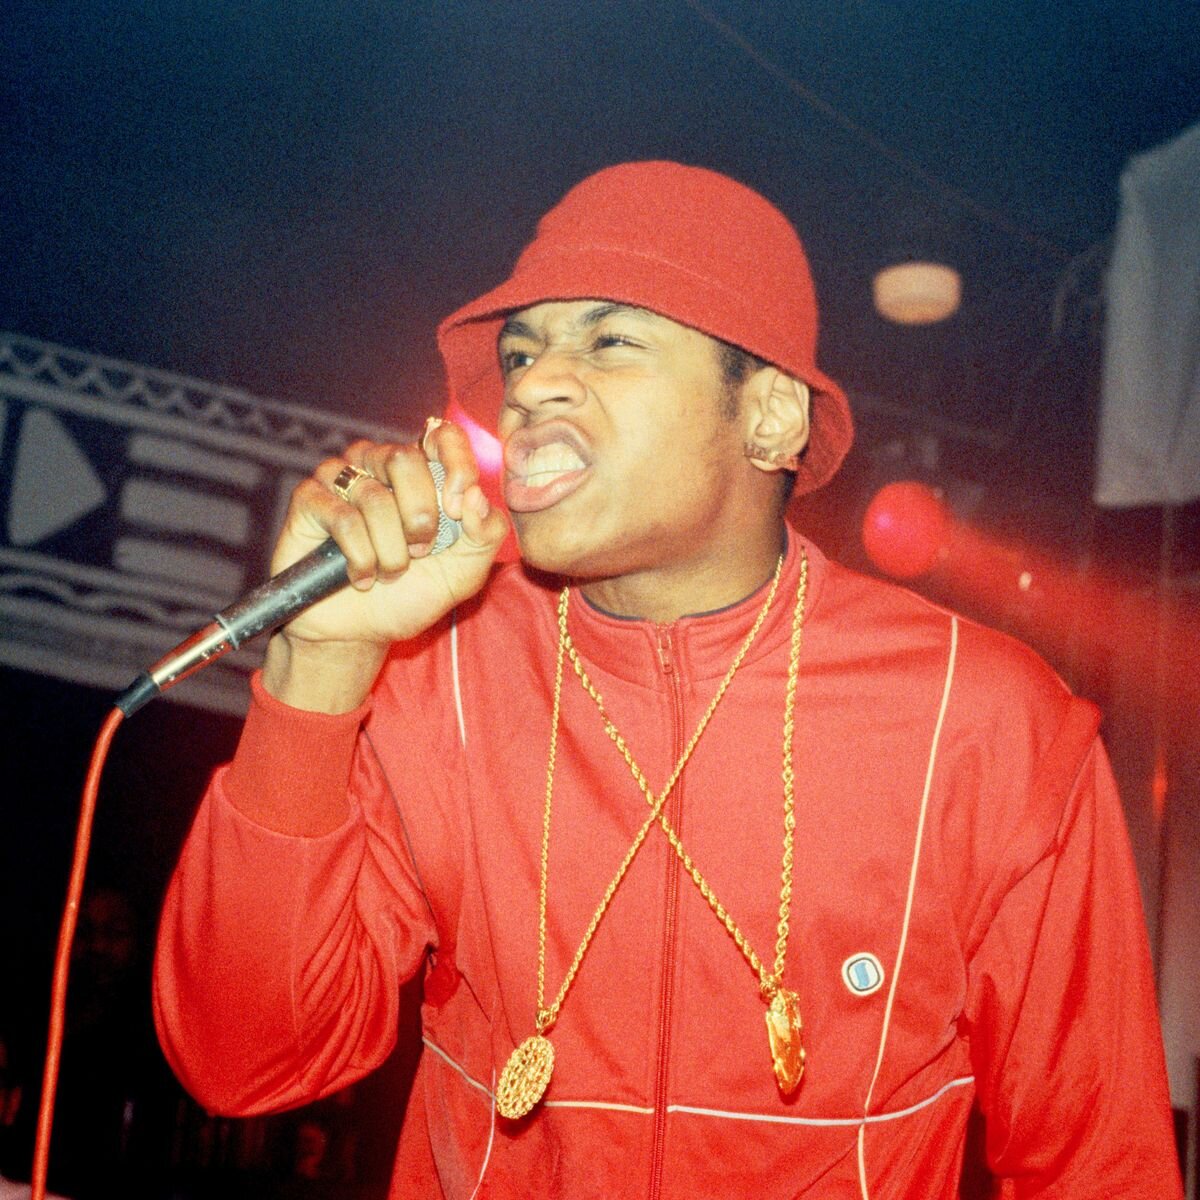 LL Cool J wearing a red tracksuit on stage